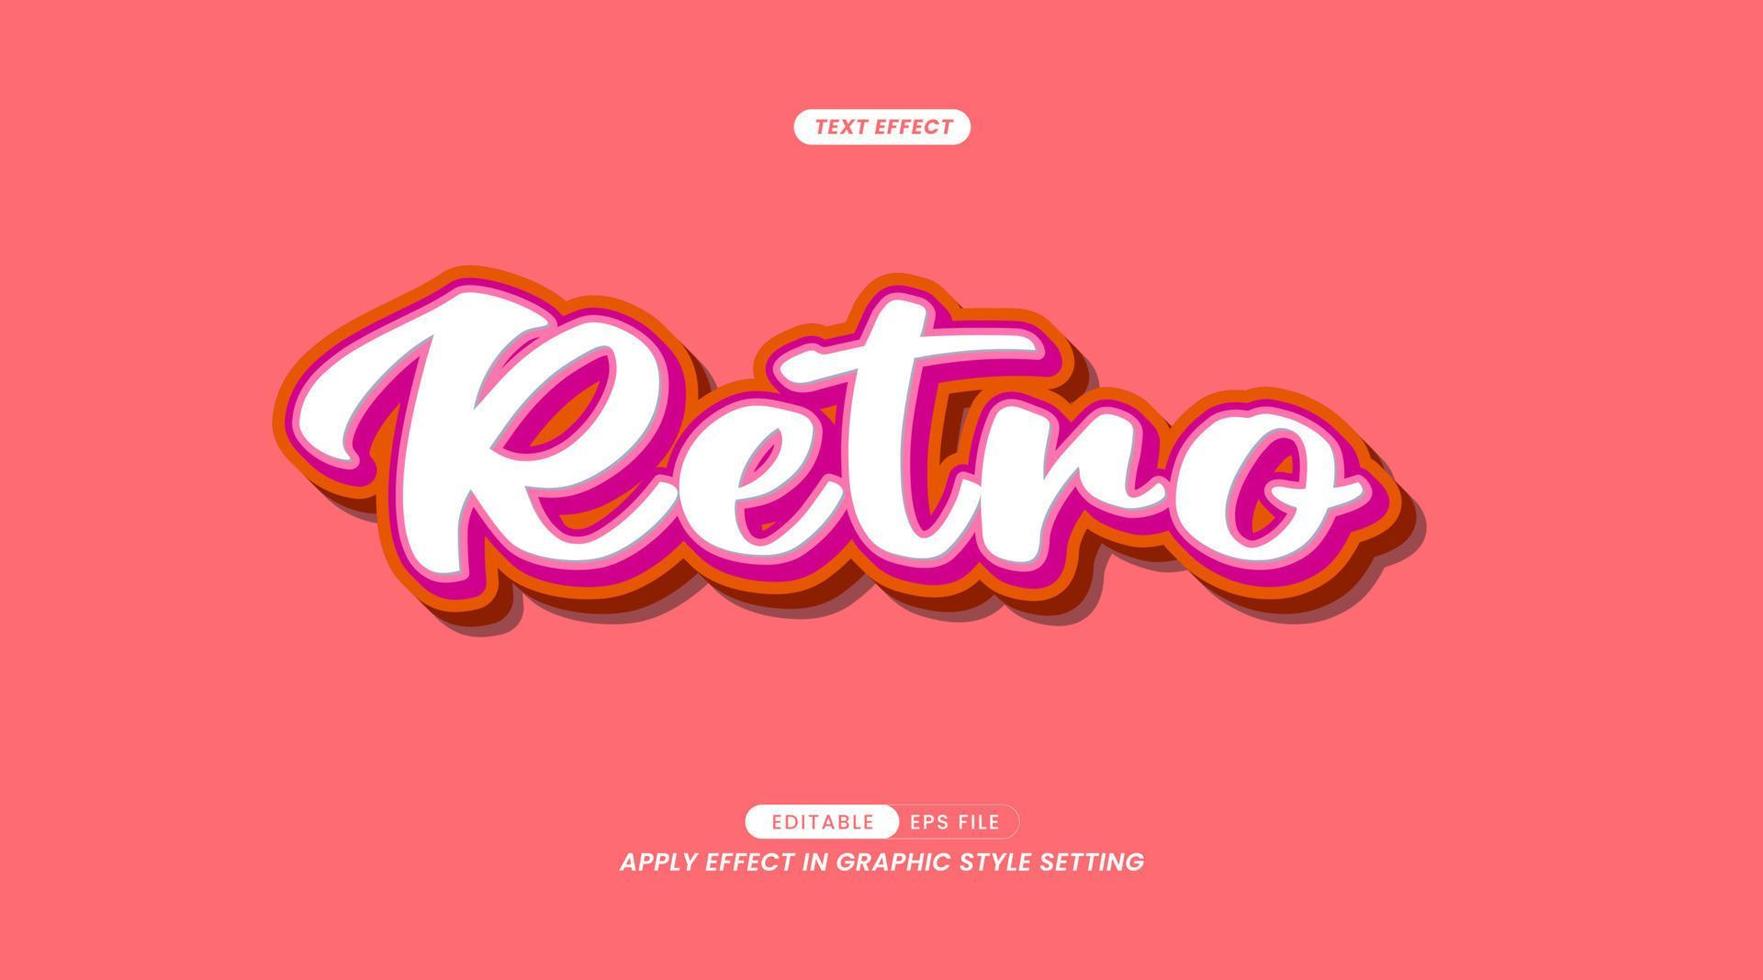 Editable Text Effect - Retro Slogan with Background vector